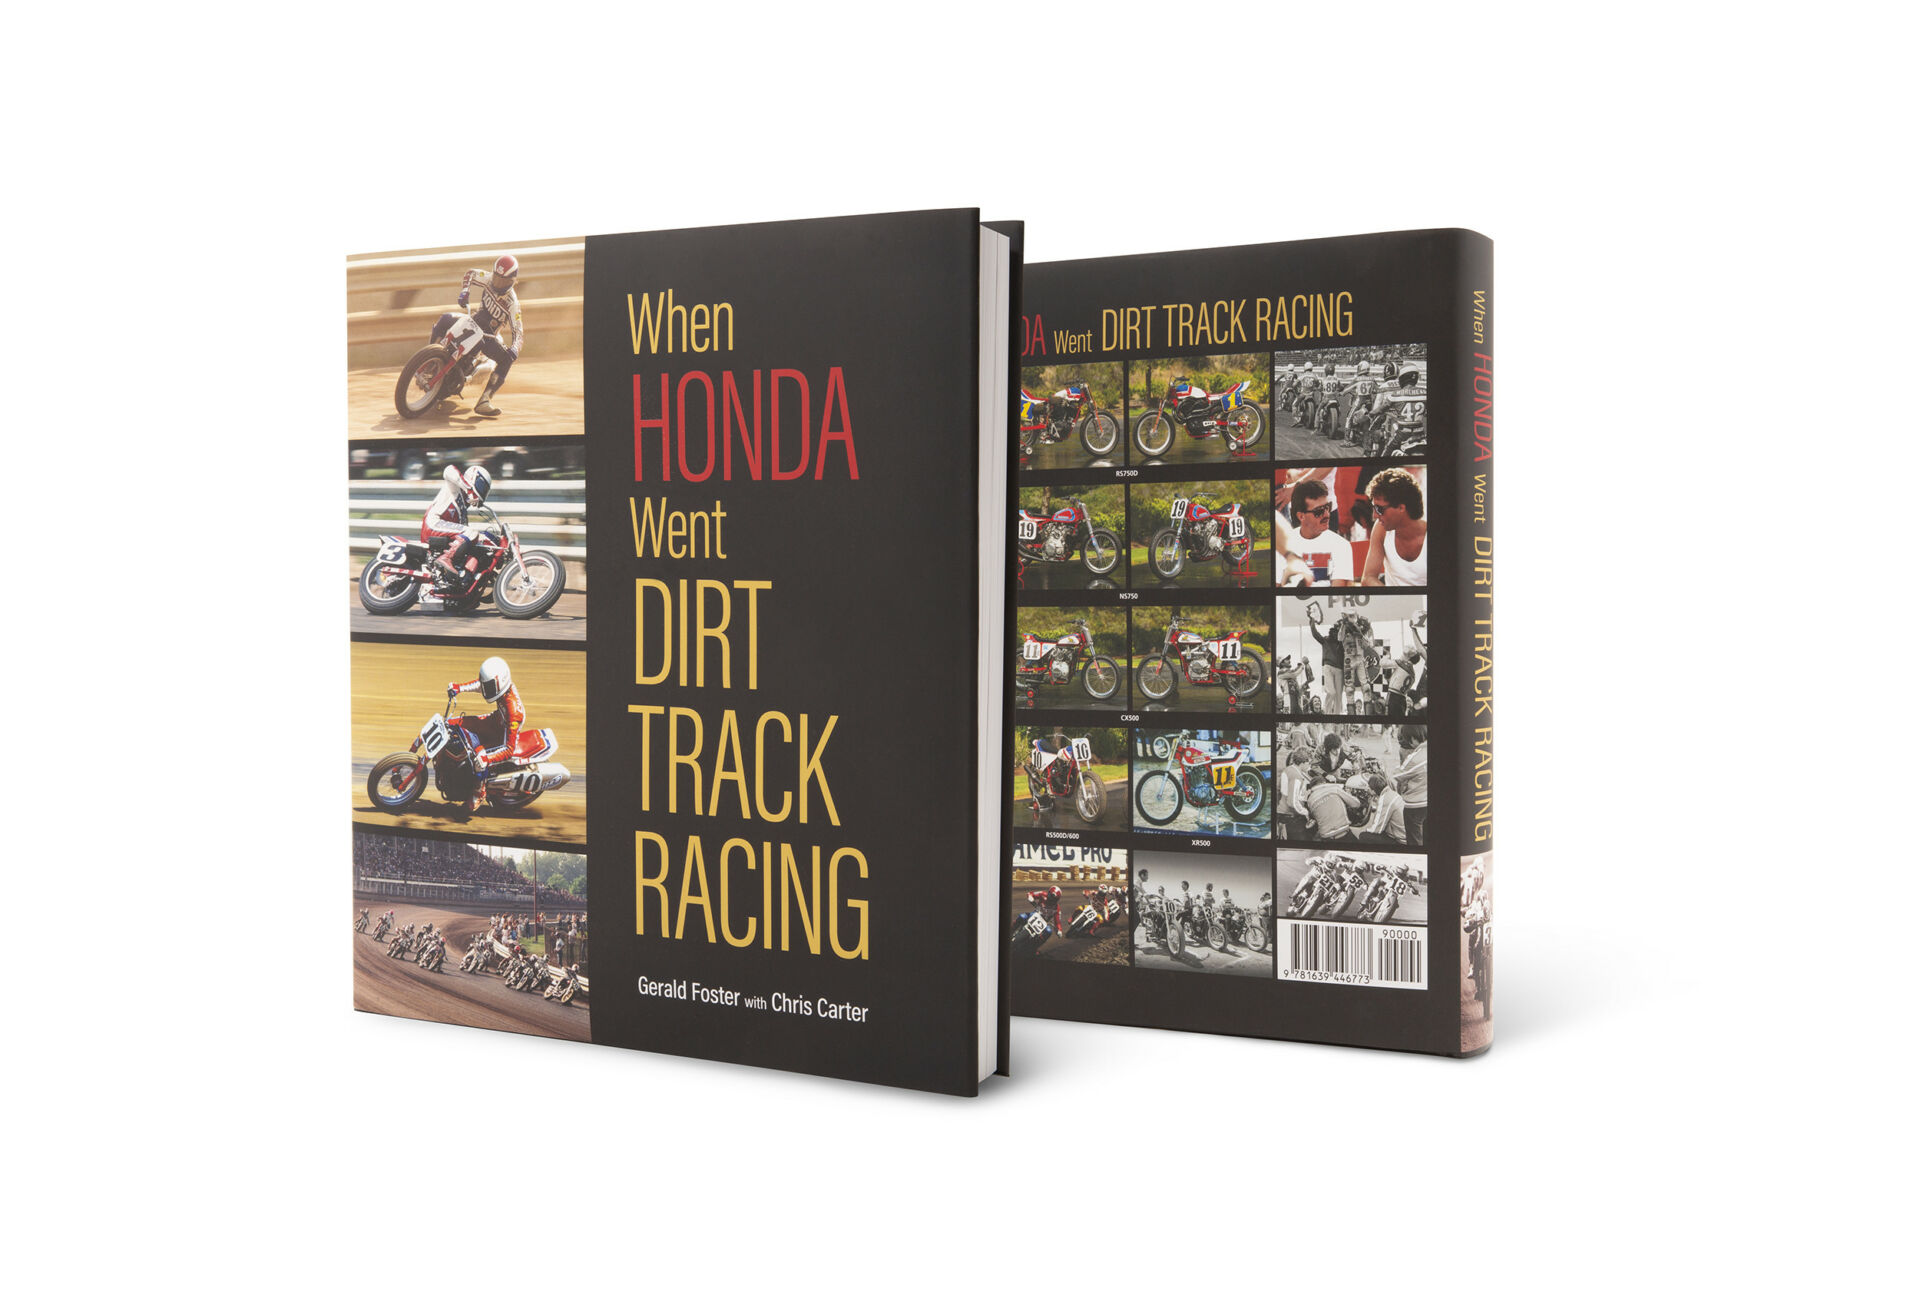 “When Honda Went Dirt Track Racing” is available now from Motion Pro. Photo courtesy Motion Pro.